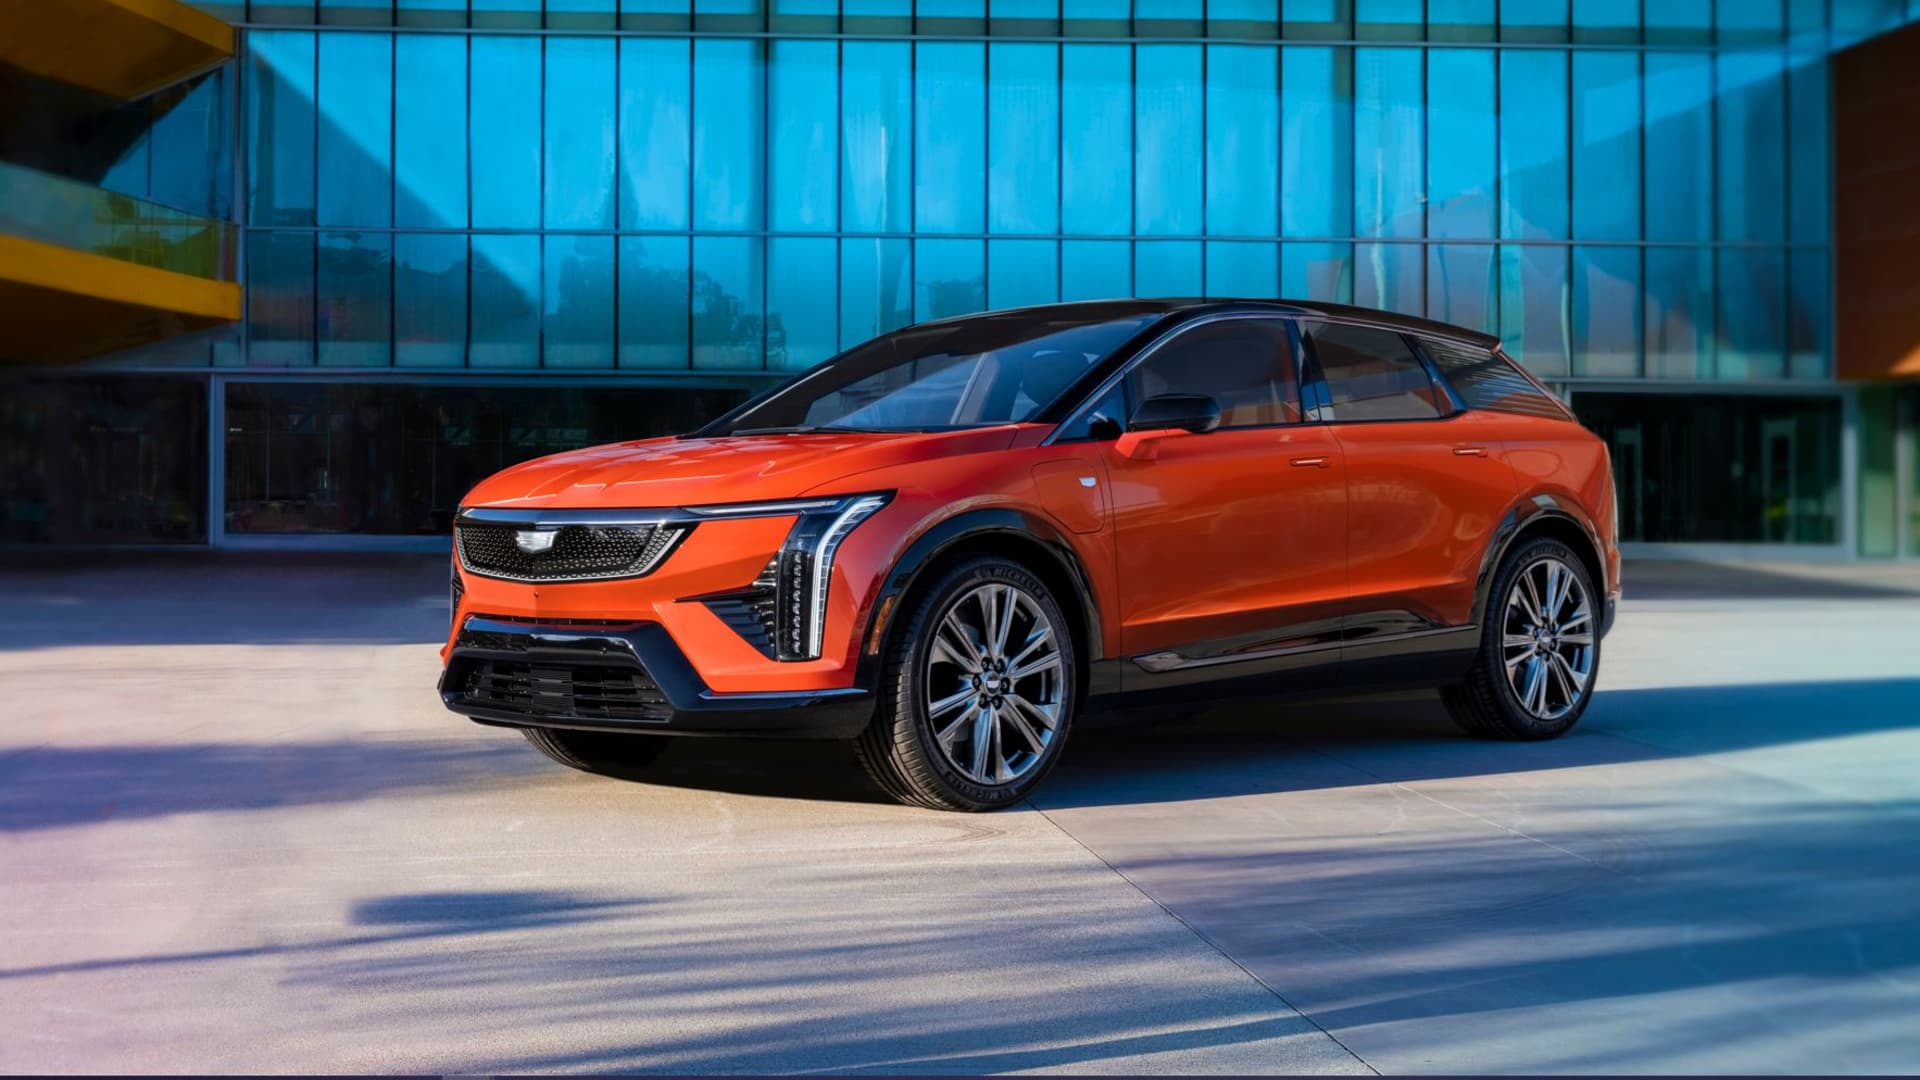 Cadillac reveals its new entry-level EV, a compact crossover known as the Optiq